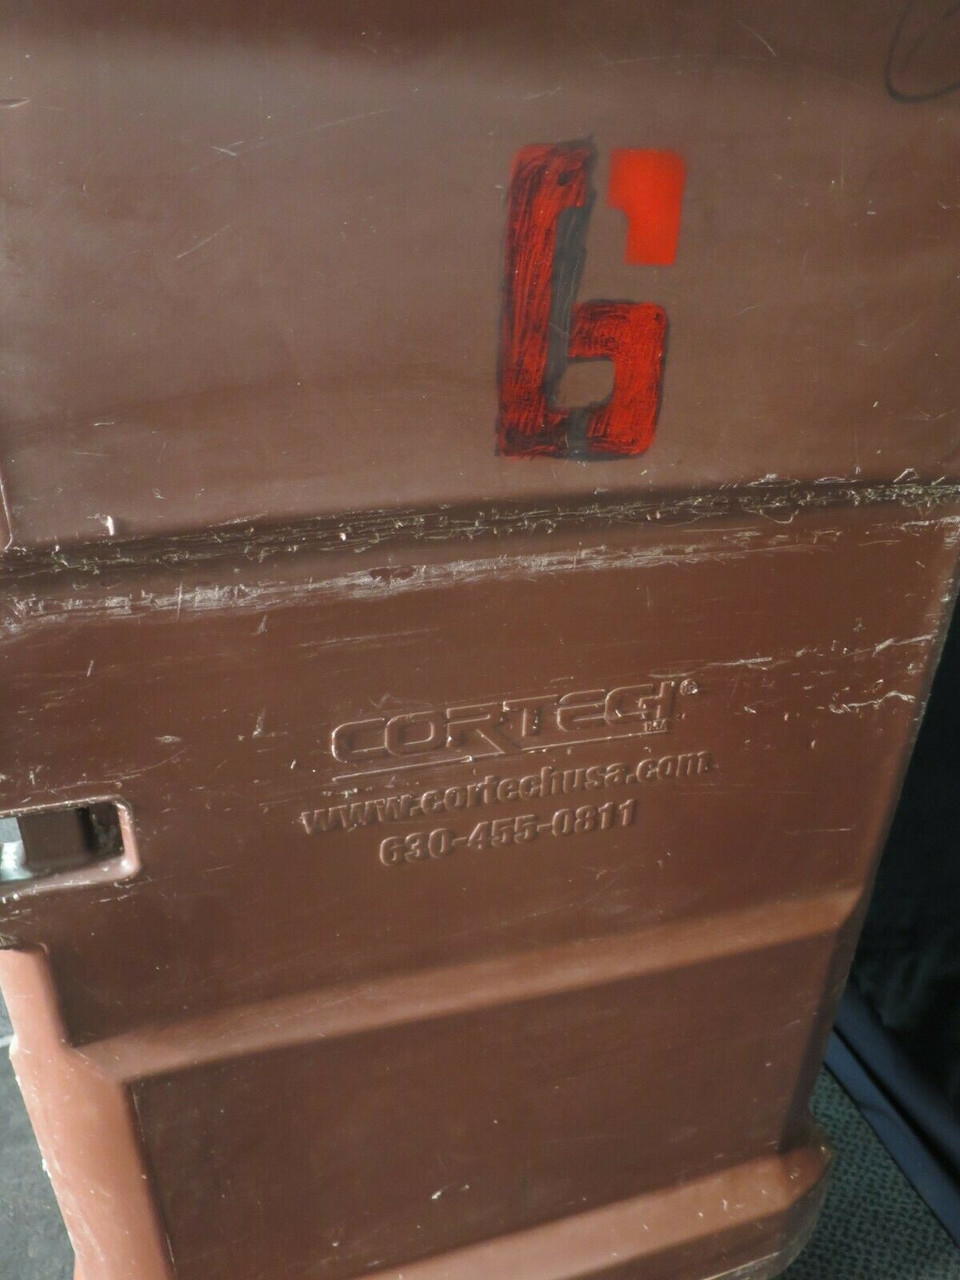 Insulated Food Tray Delivery Cart - Cortech Chuckwagon Jr /C1716